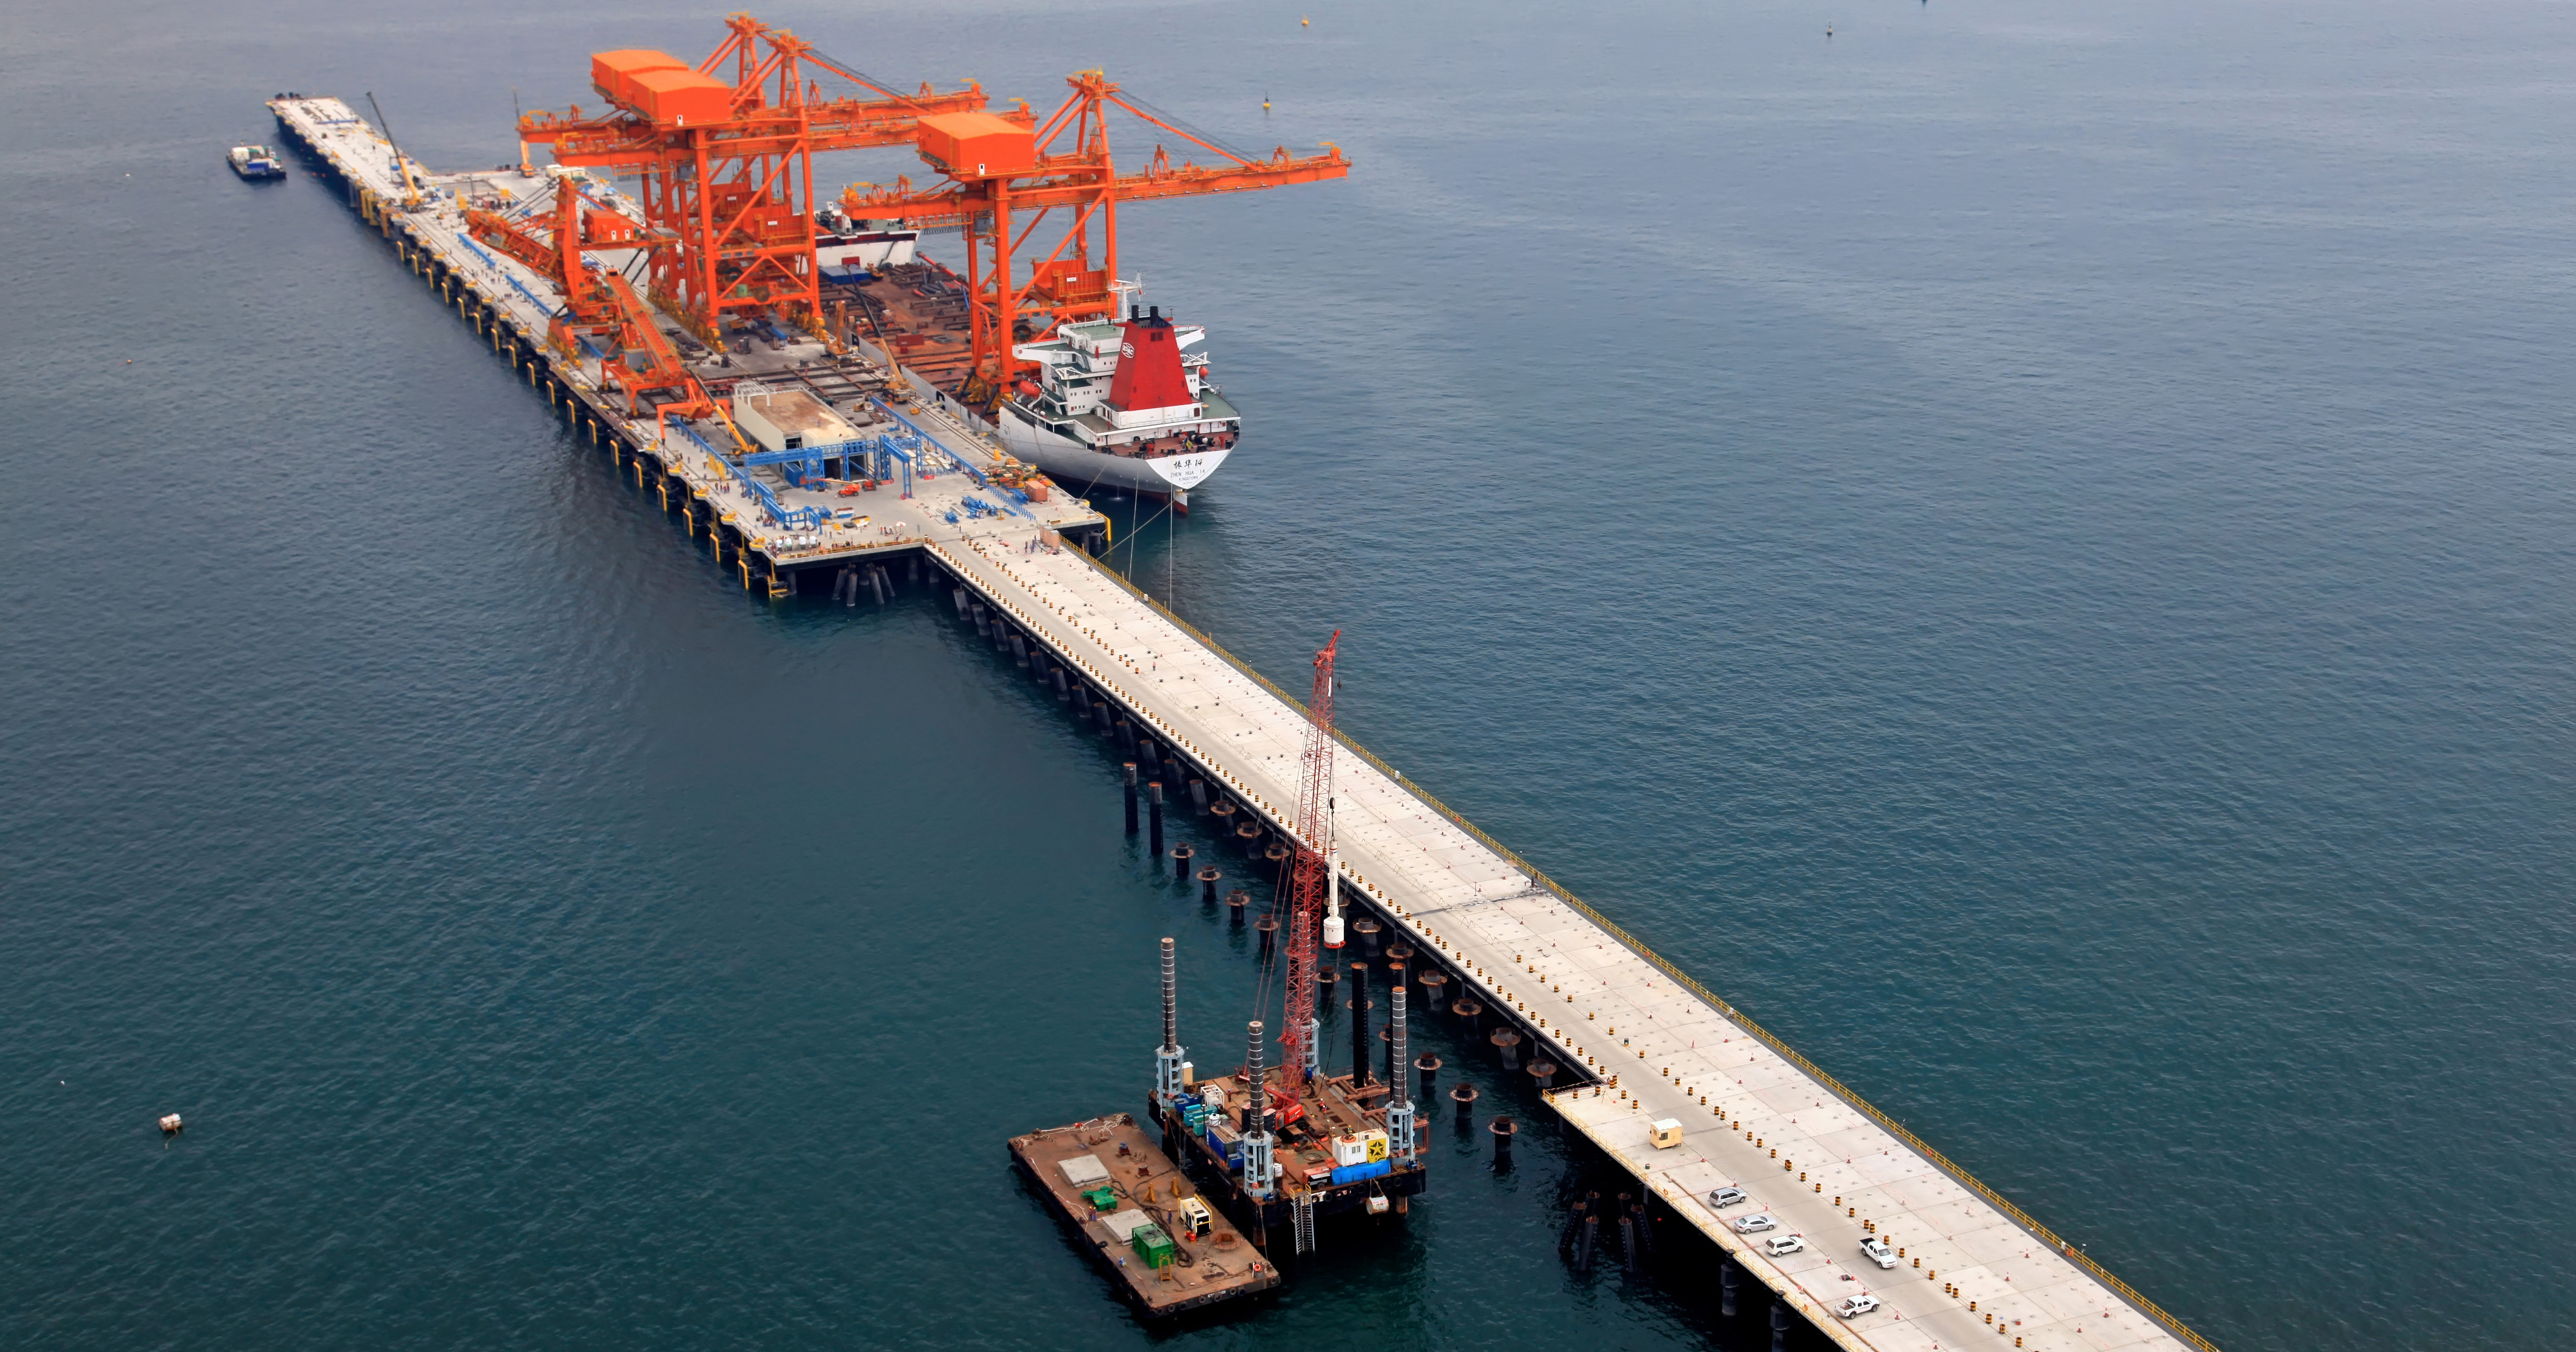 Dutch engineering firm Royal Haskoning built the iron ore jetty at the port of Soha in Oman.